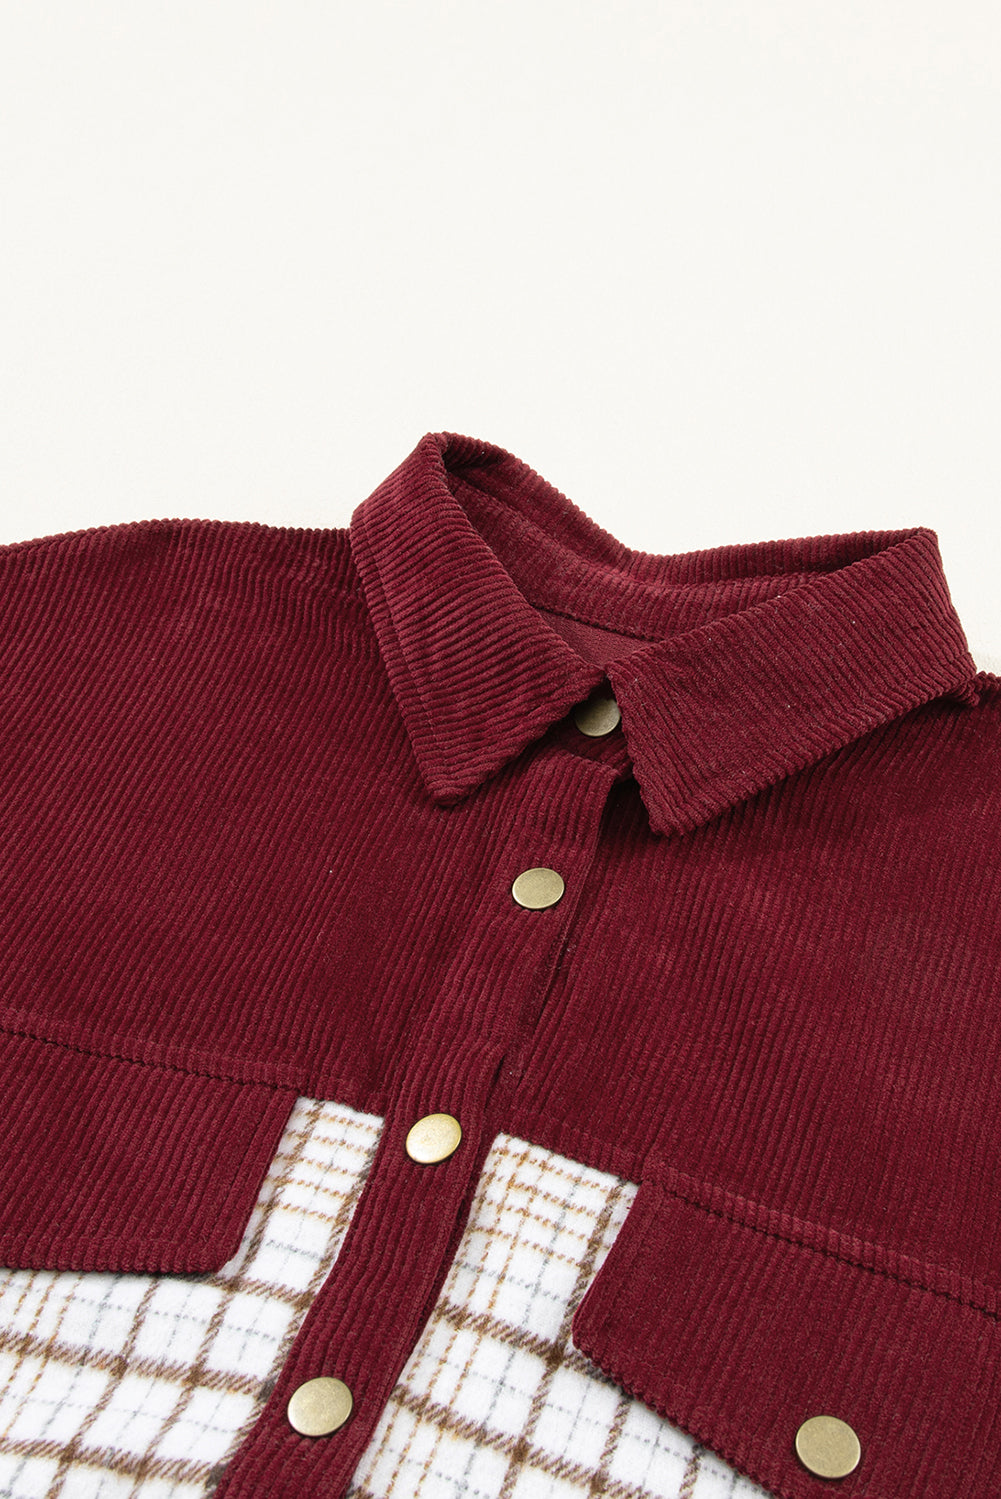 Fiery Red Plaid Patchwork Button-up Shift Shirt Jacket